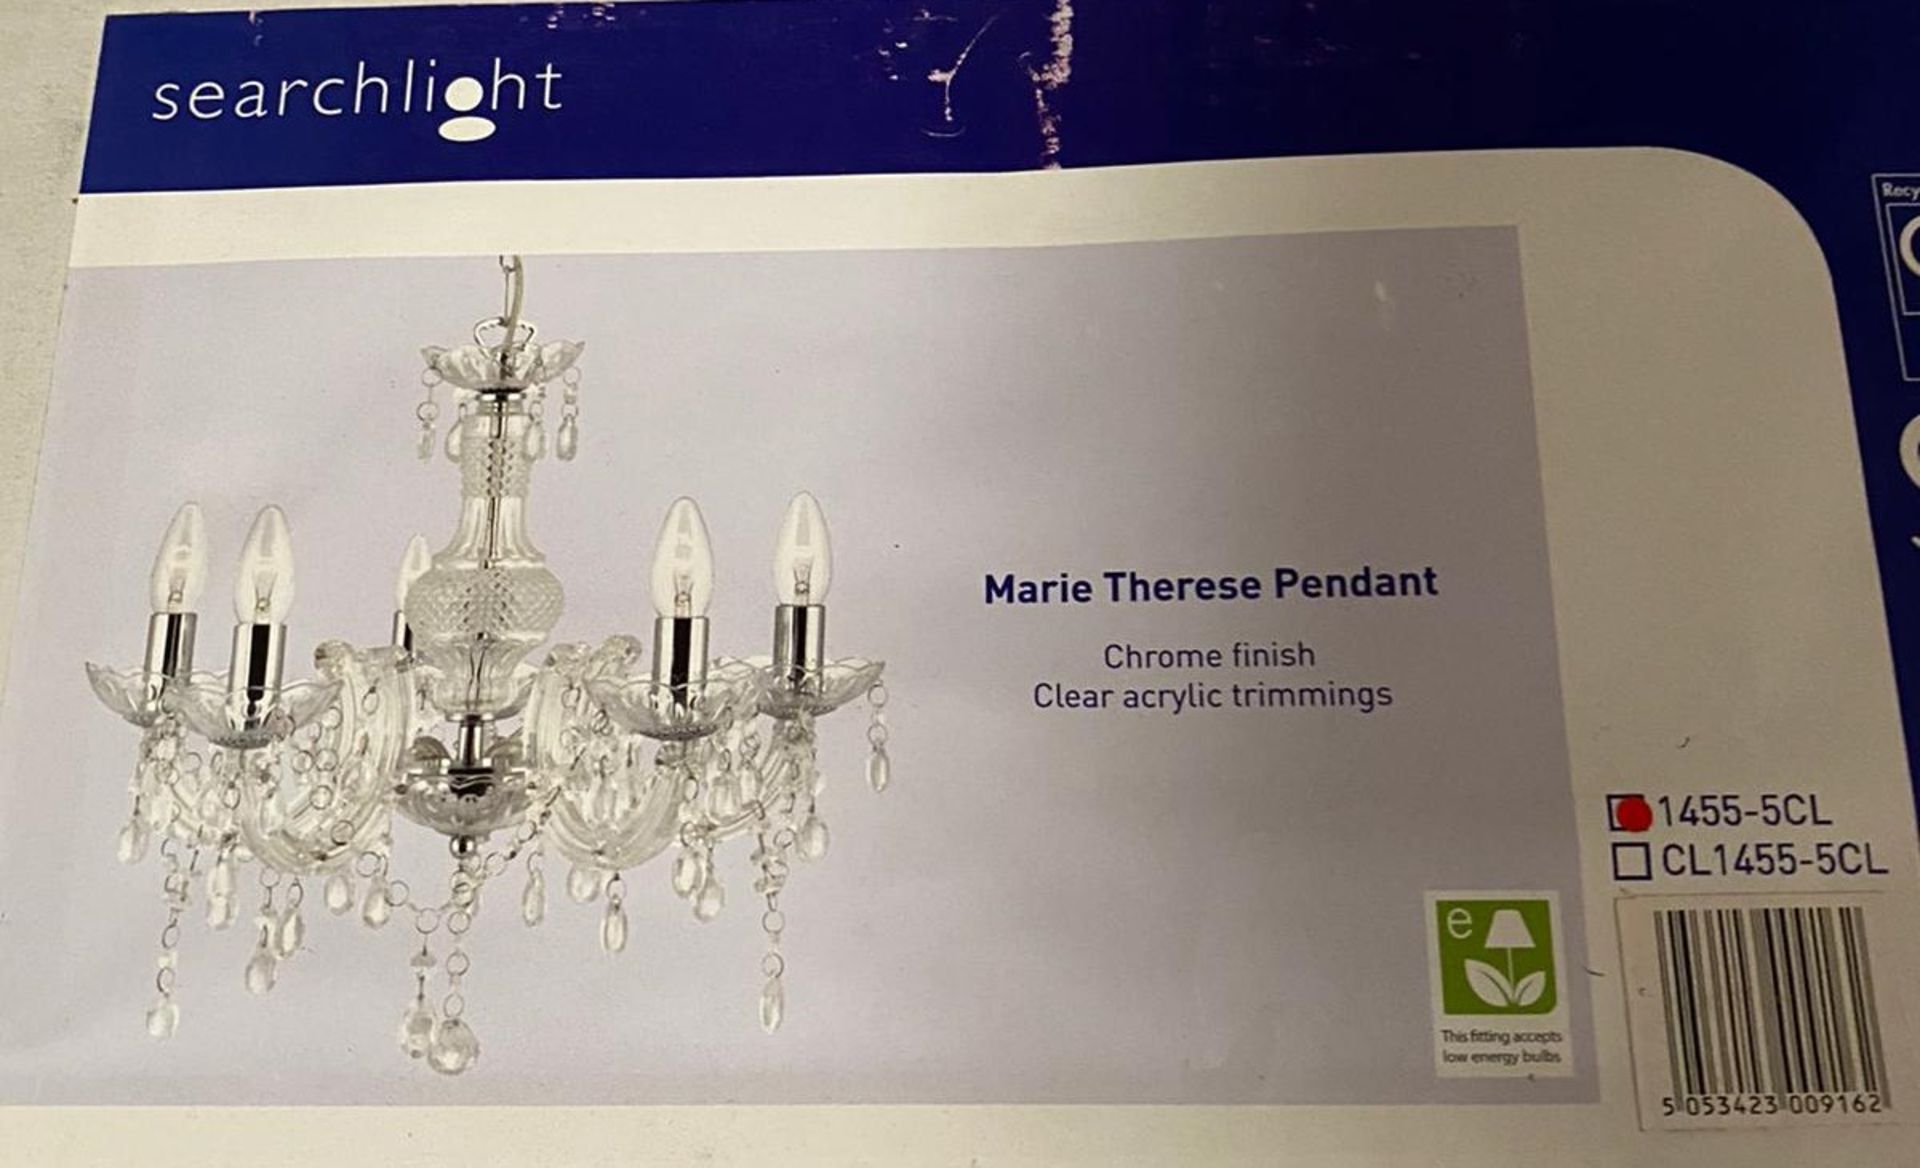 1 x Searchlight marie Therese Pendant in chrome - Ref: 1455-5CL - New and Boxed - RRP: £100.00